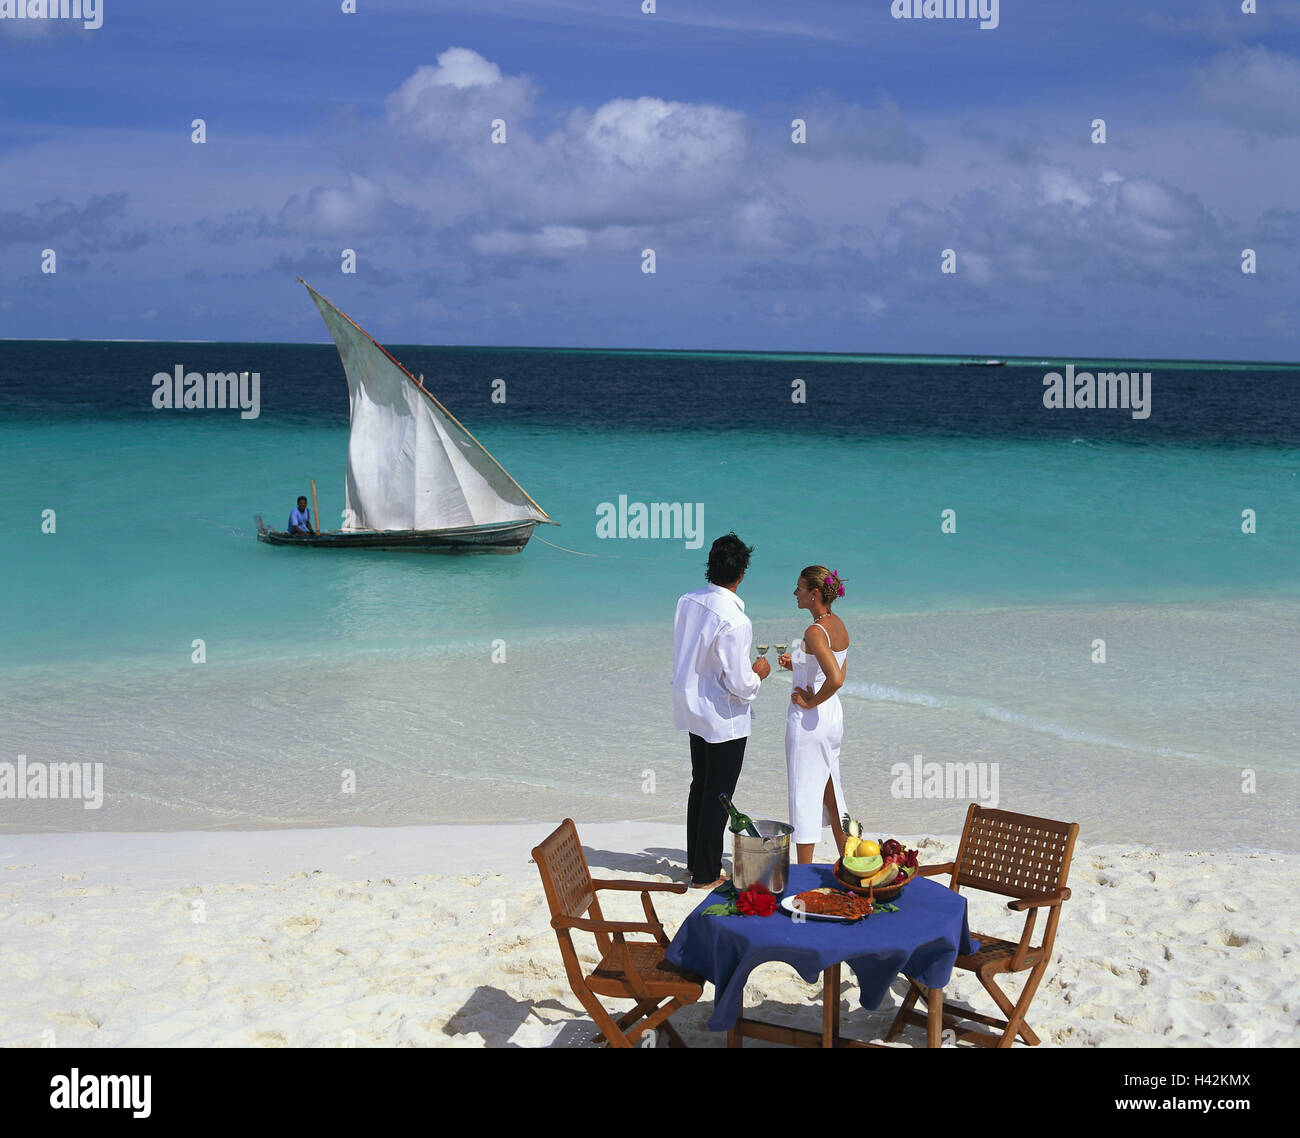 Beach, couple, back view, sea view, table, covered, sea, boat, Dhoni, model released, man, woman, person, outside, vacation, honeymoon, marries, happy, recreation, summer, carefree, Idyll, harmony, lifestyle, togetherness, the Maldives, ocean, falls in love, love, wine, glasses, lobsters, feasts, dream vacation, fruits, exotic, horizon, sailboats, tourist, Stock Photo